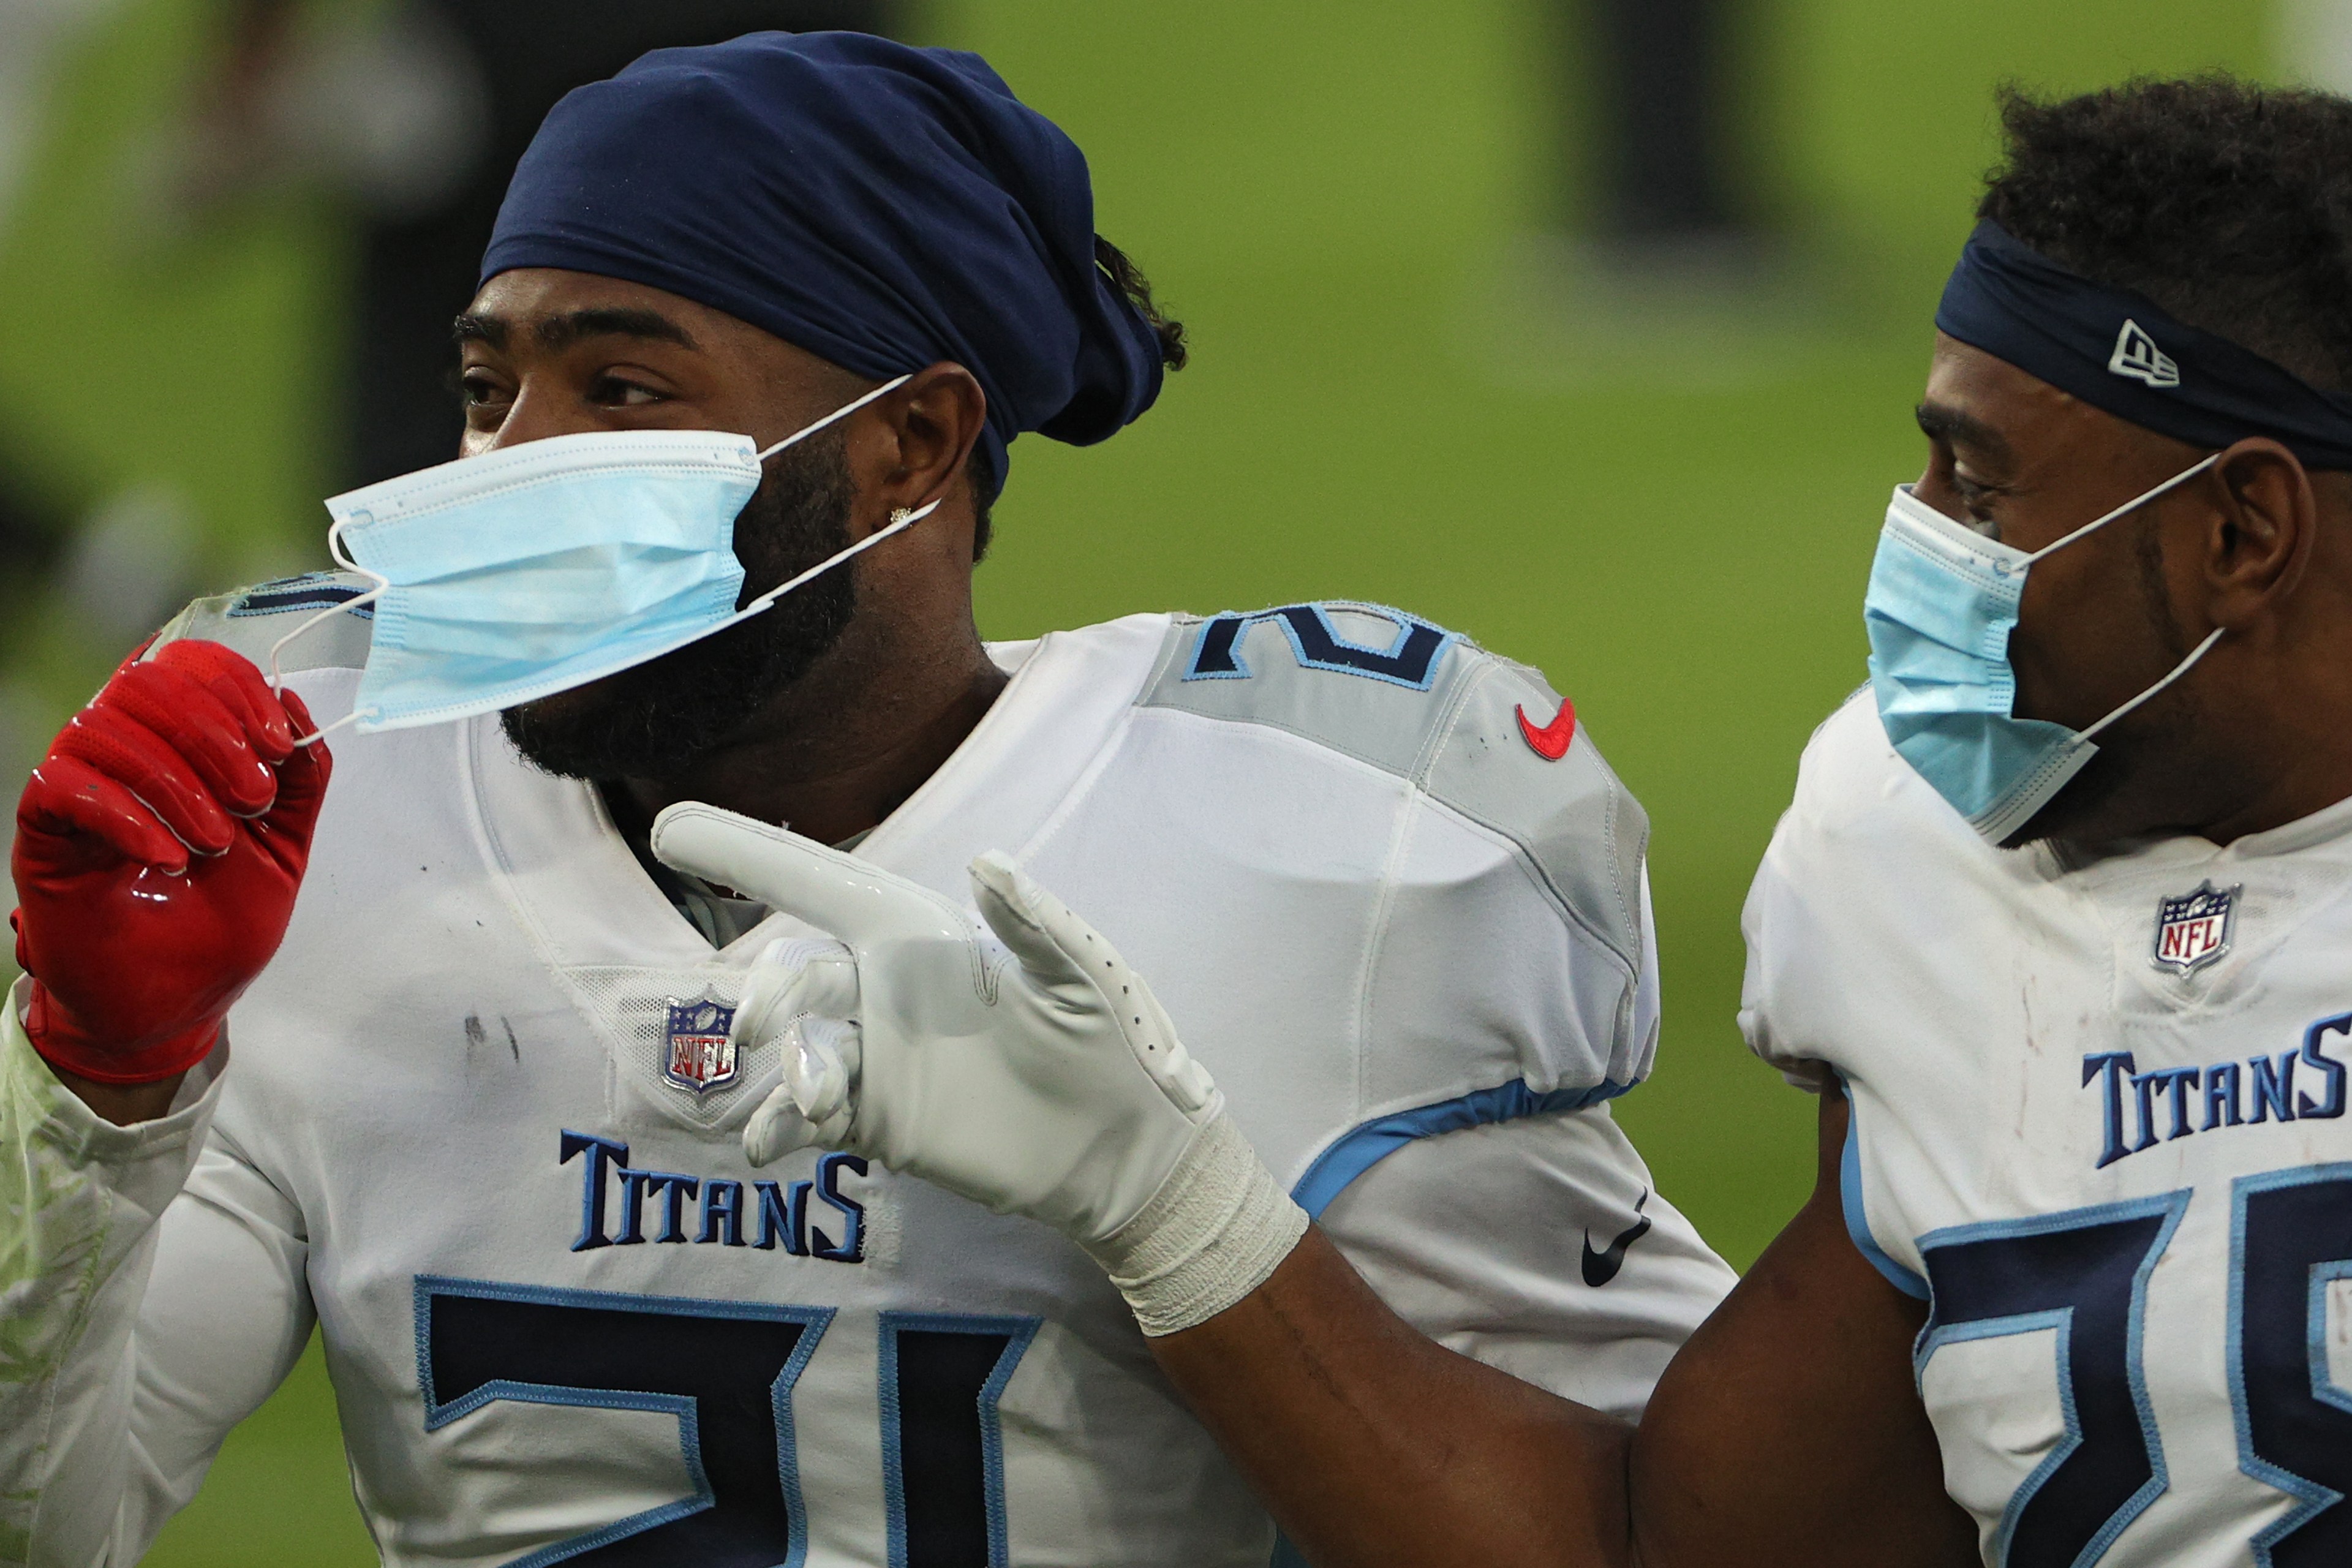 Two Titans players wear masks